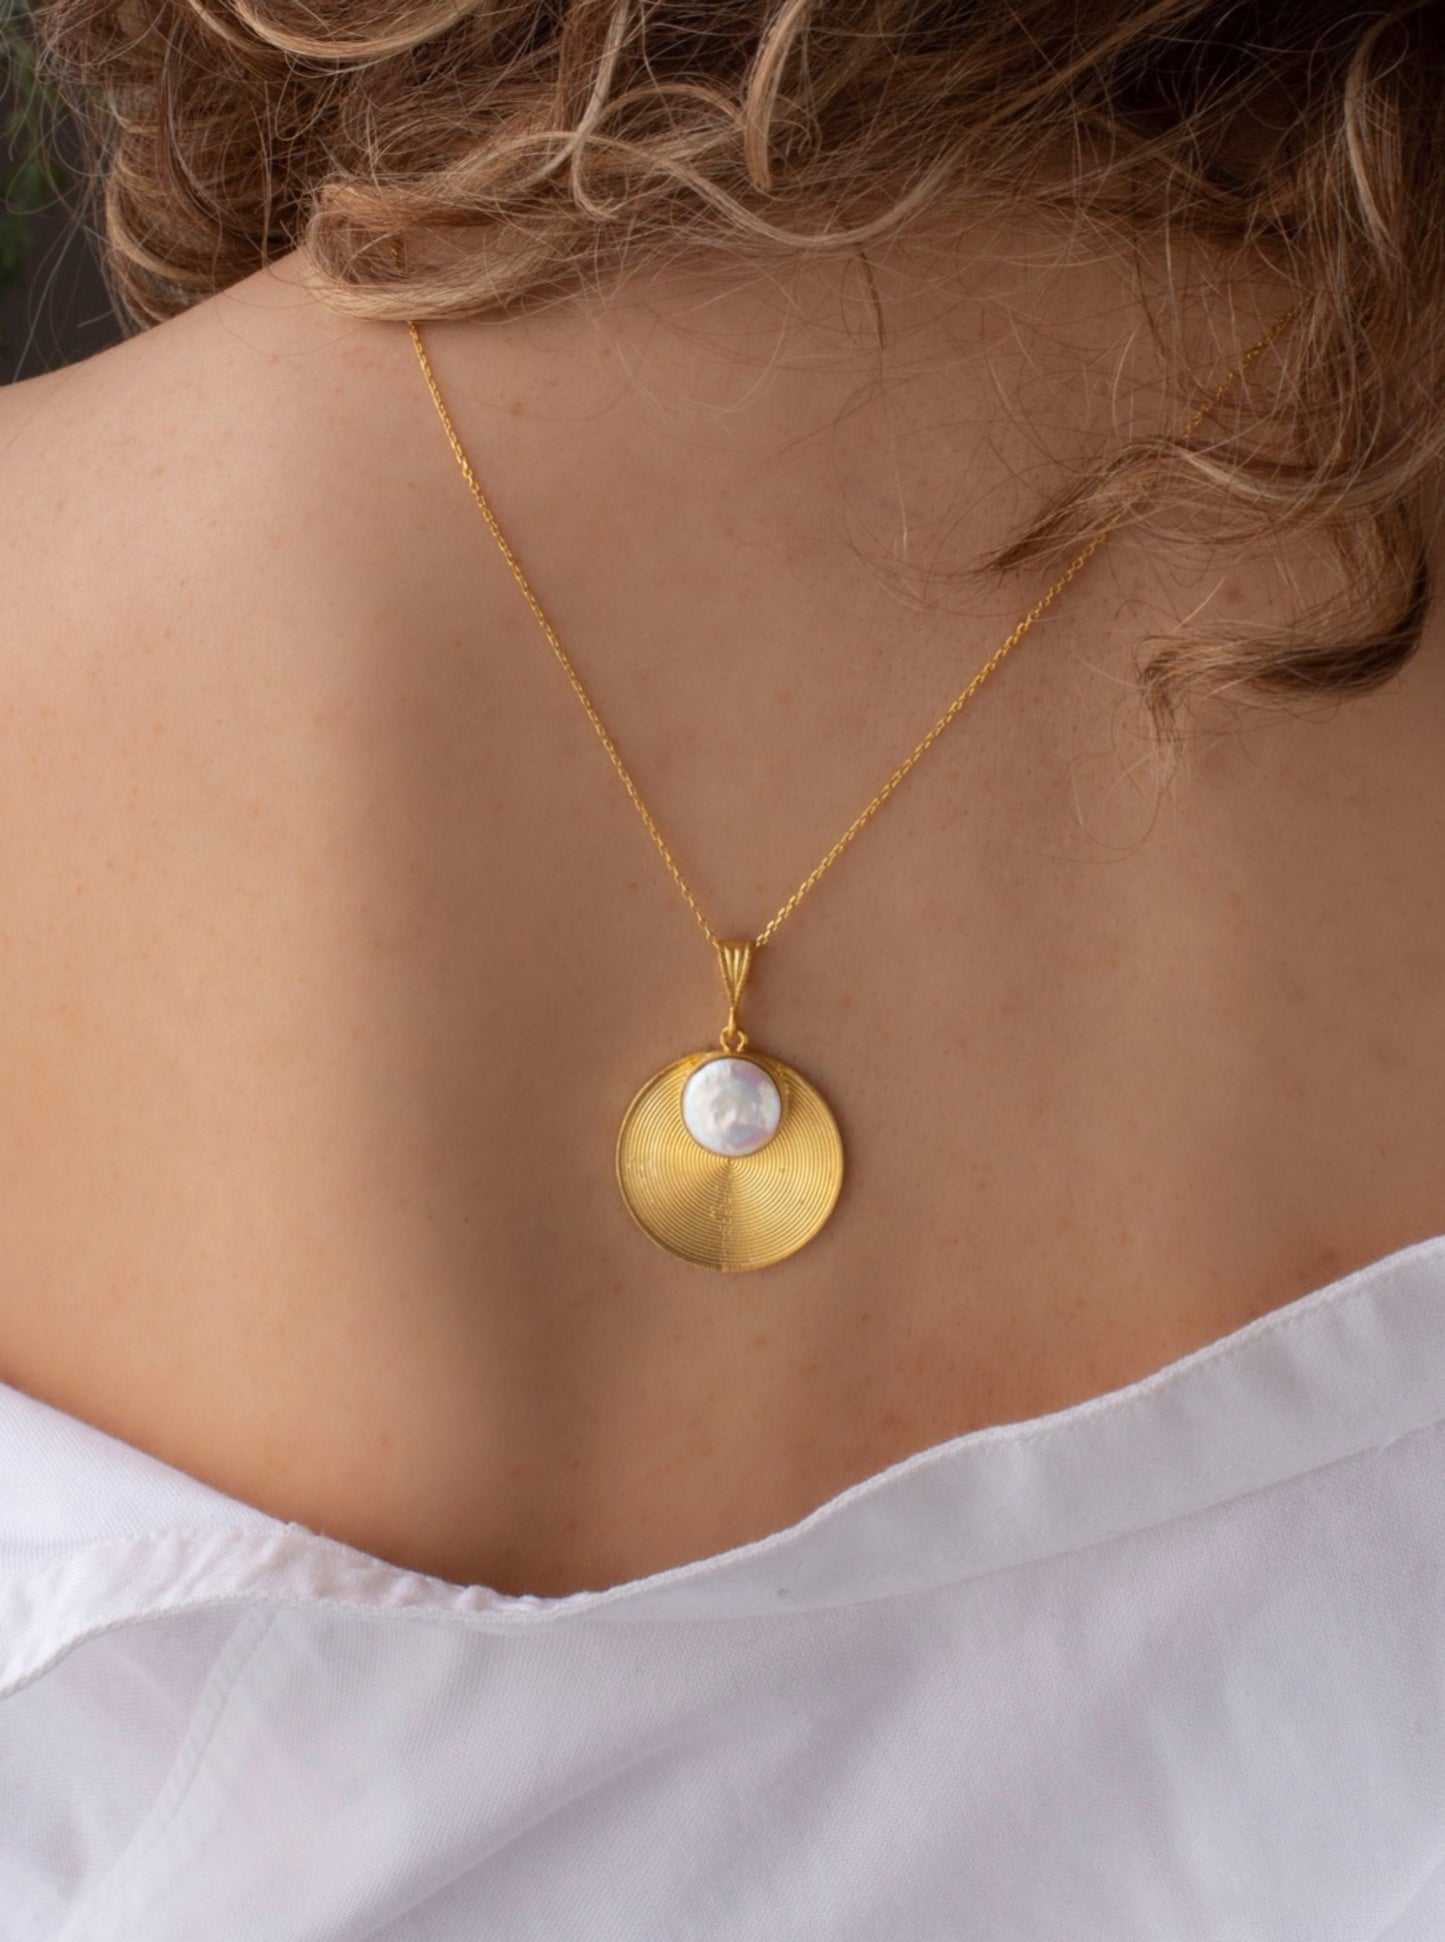 Sweat water pearl necklace pendant gold plated with spirals 